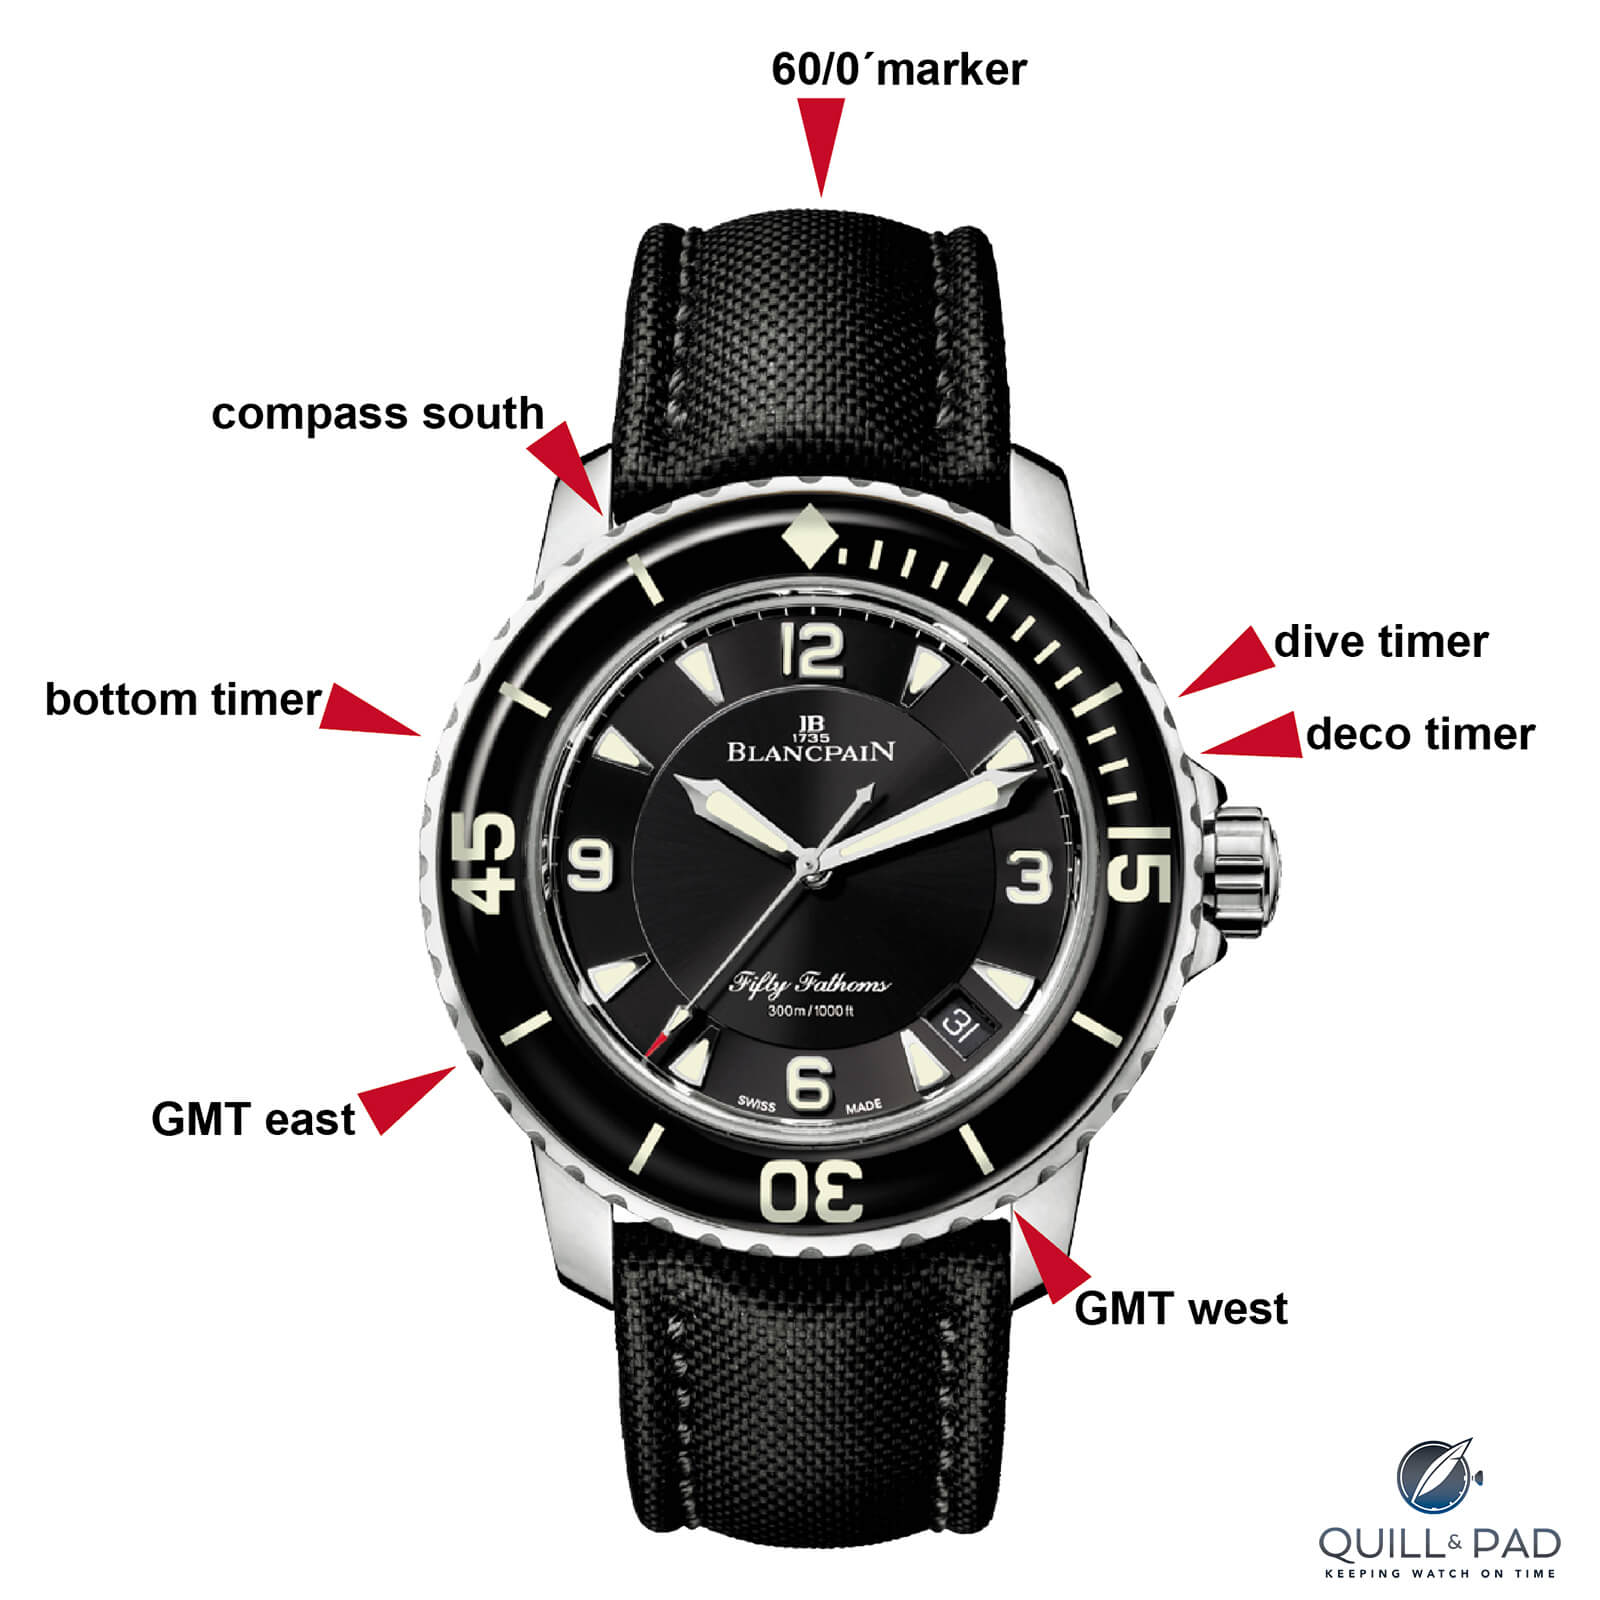 WATCH WATER RESISTANCE EXPLAINED – PANZERA WATCHES